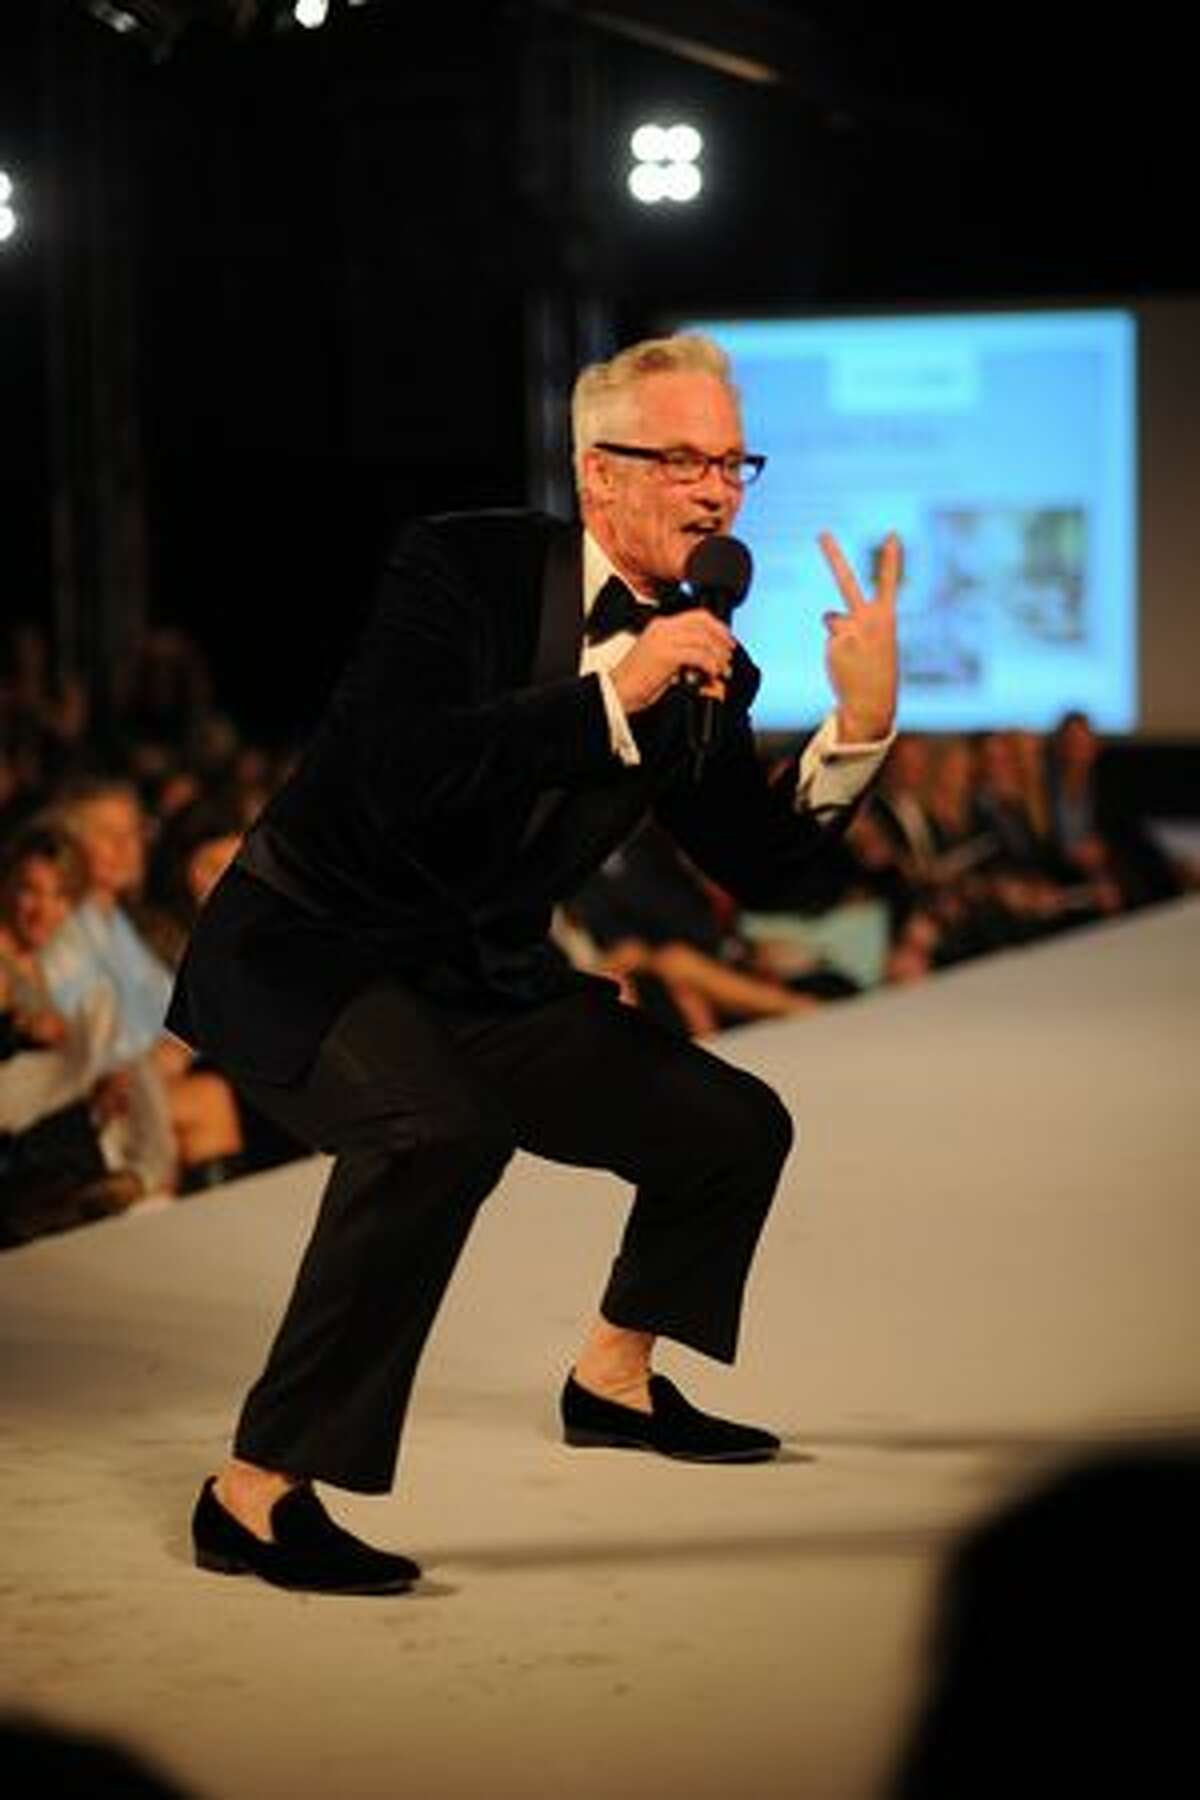 John Curley gives an energetic, if not athletic, performance as he auctions off items at the 7th Annual Fashion First show. Auction items were sold to raise money for Rise N Shine.